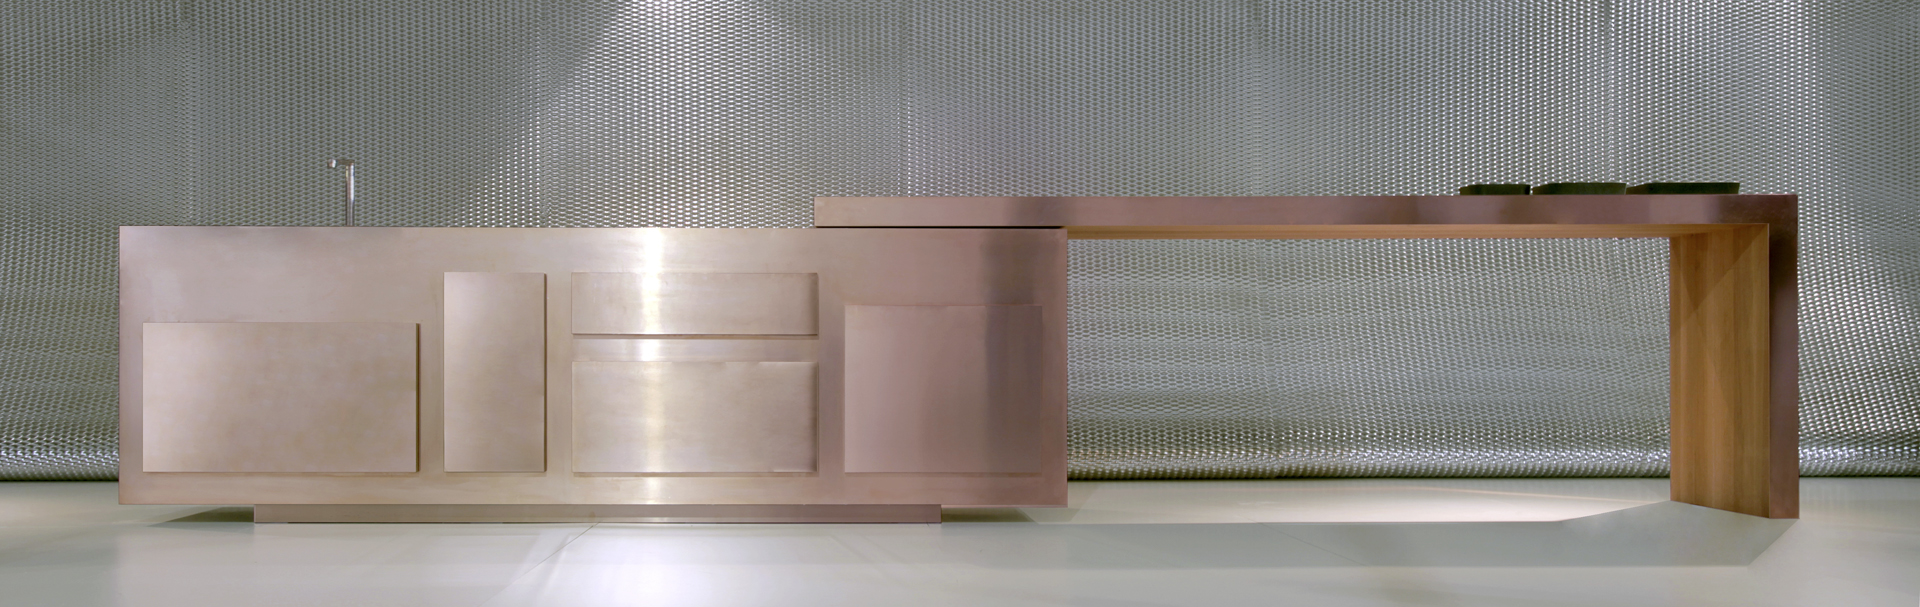 Strato_design_SEMPLICE#1_kitchen island with turning table_copper mat finishing_03